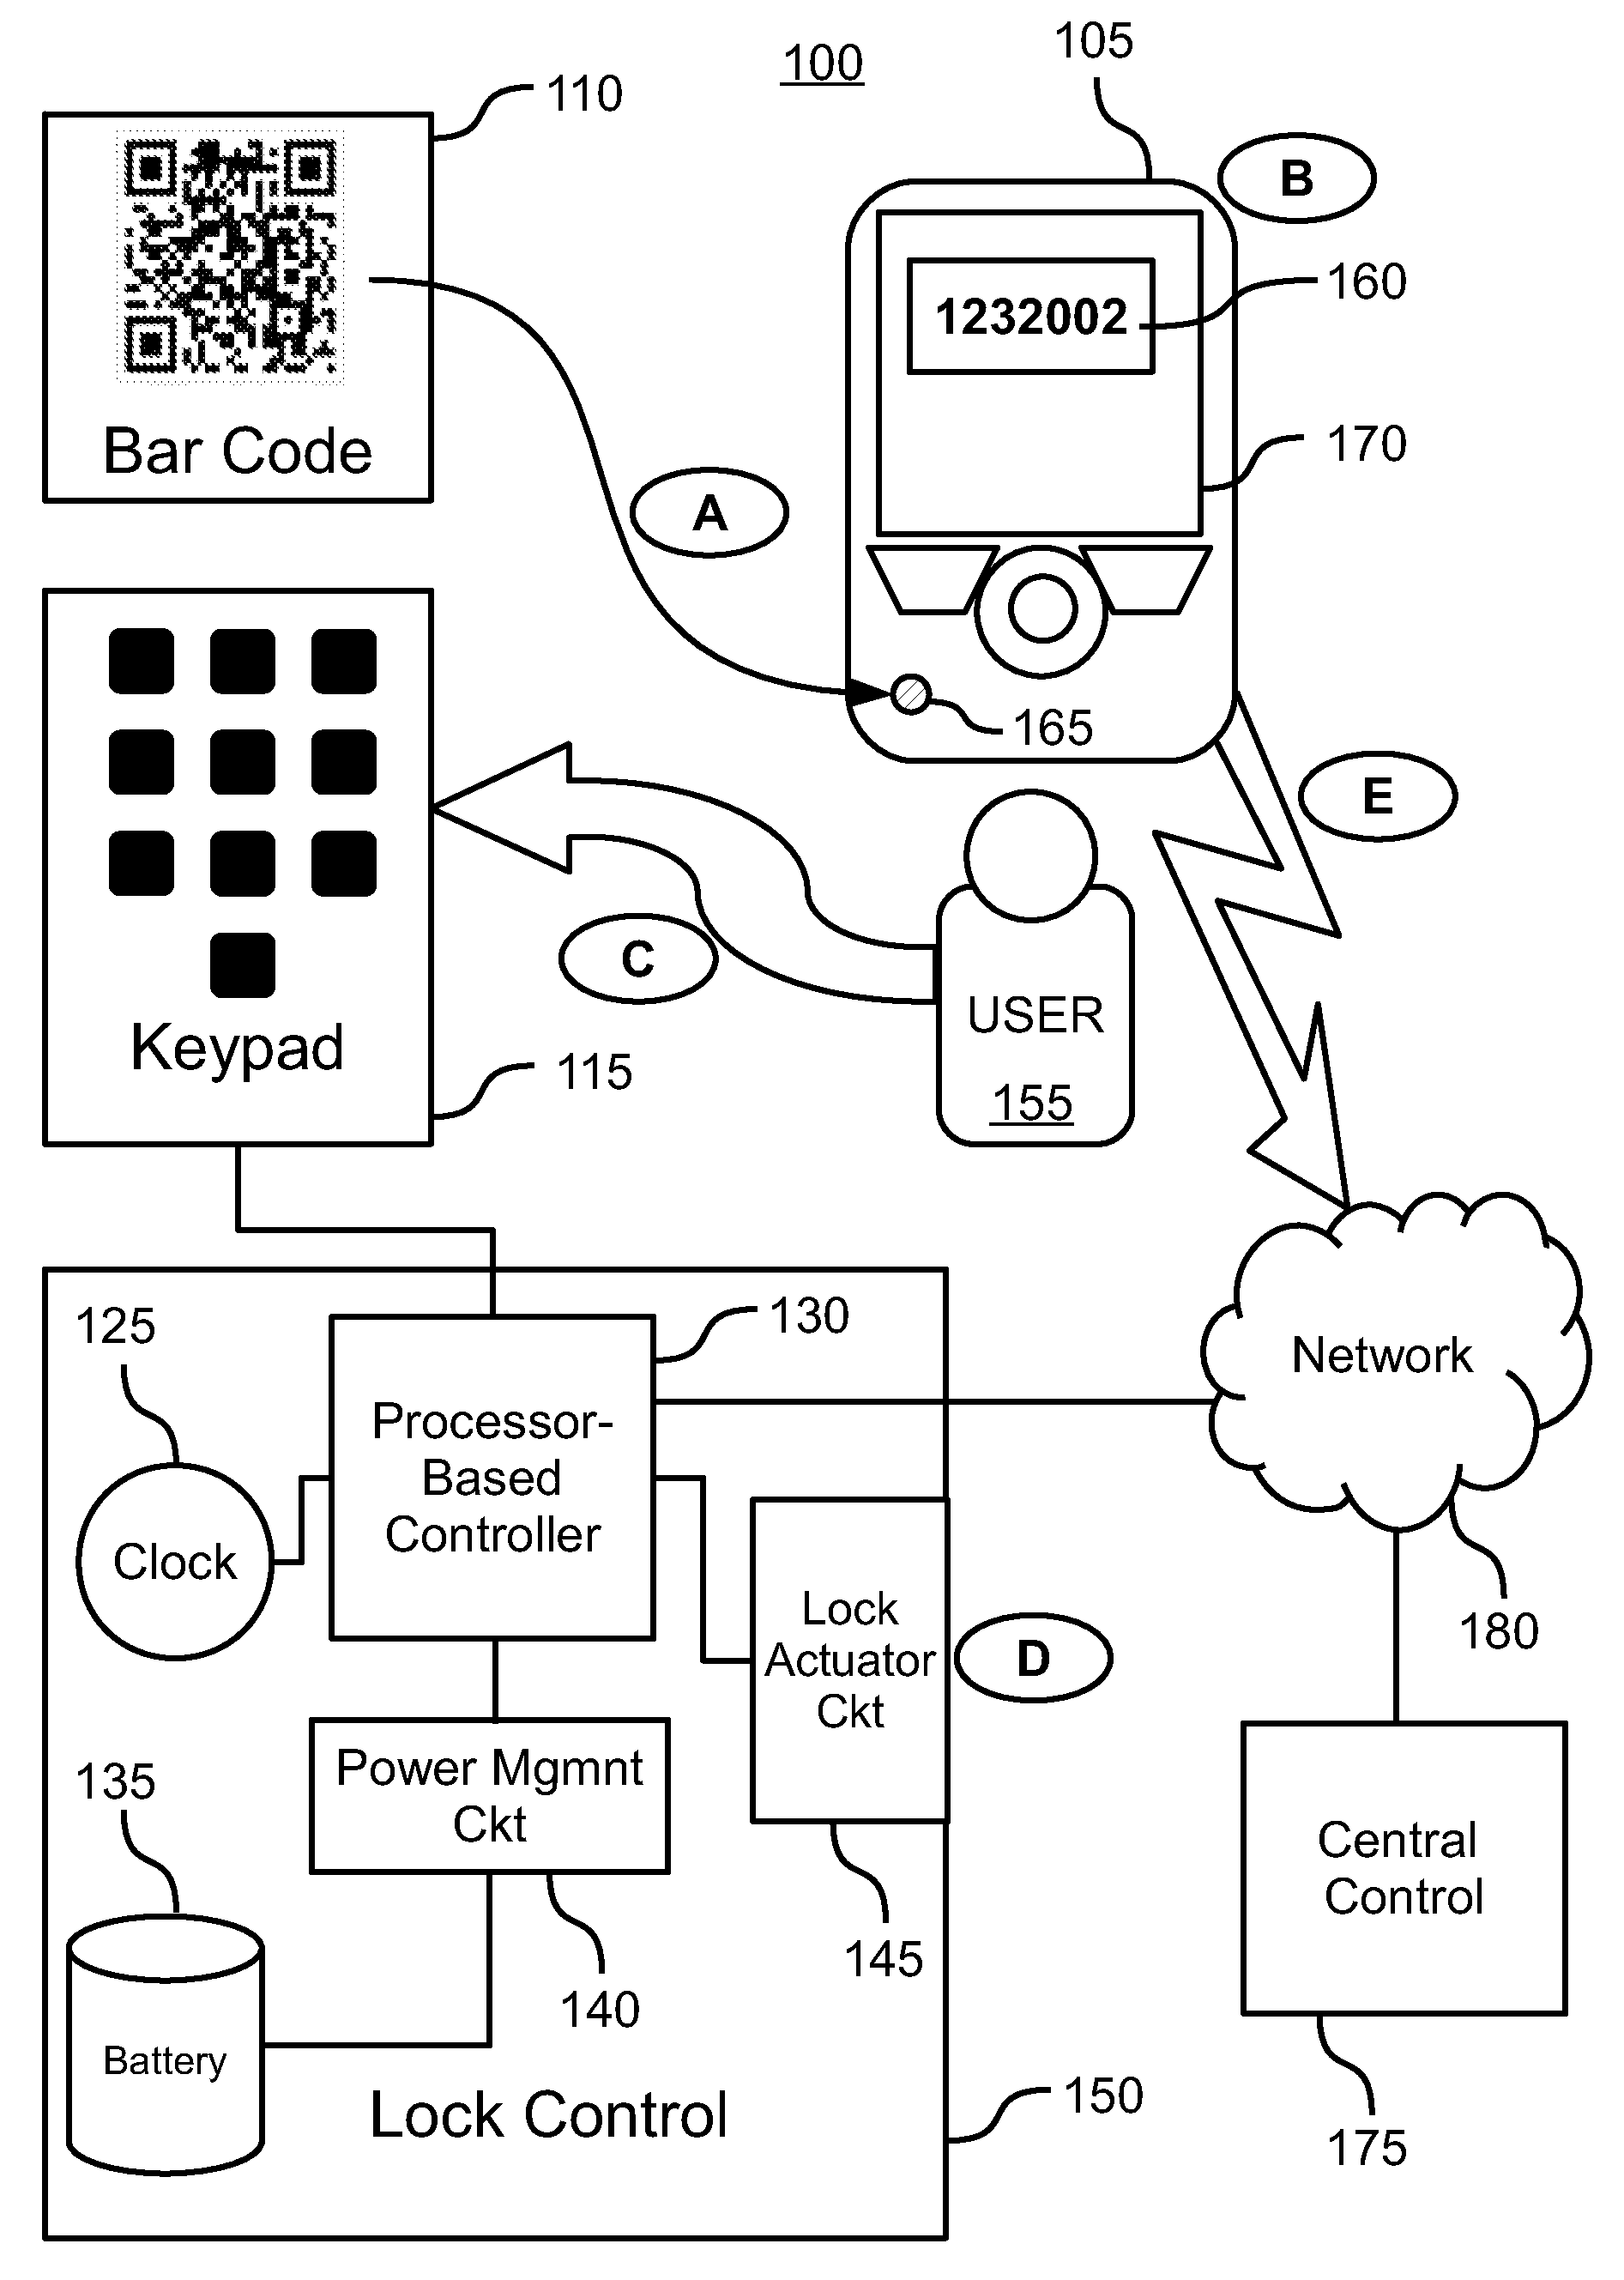 Methods and systems for an authenticating lock with bar code